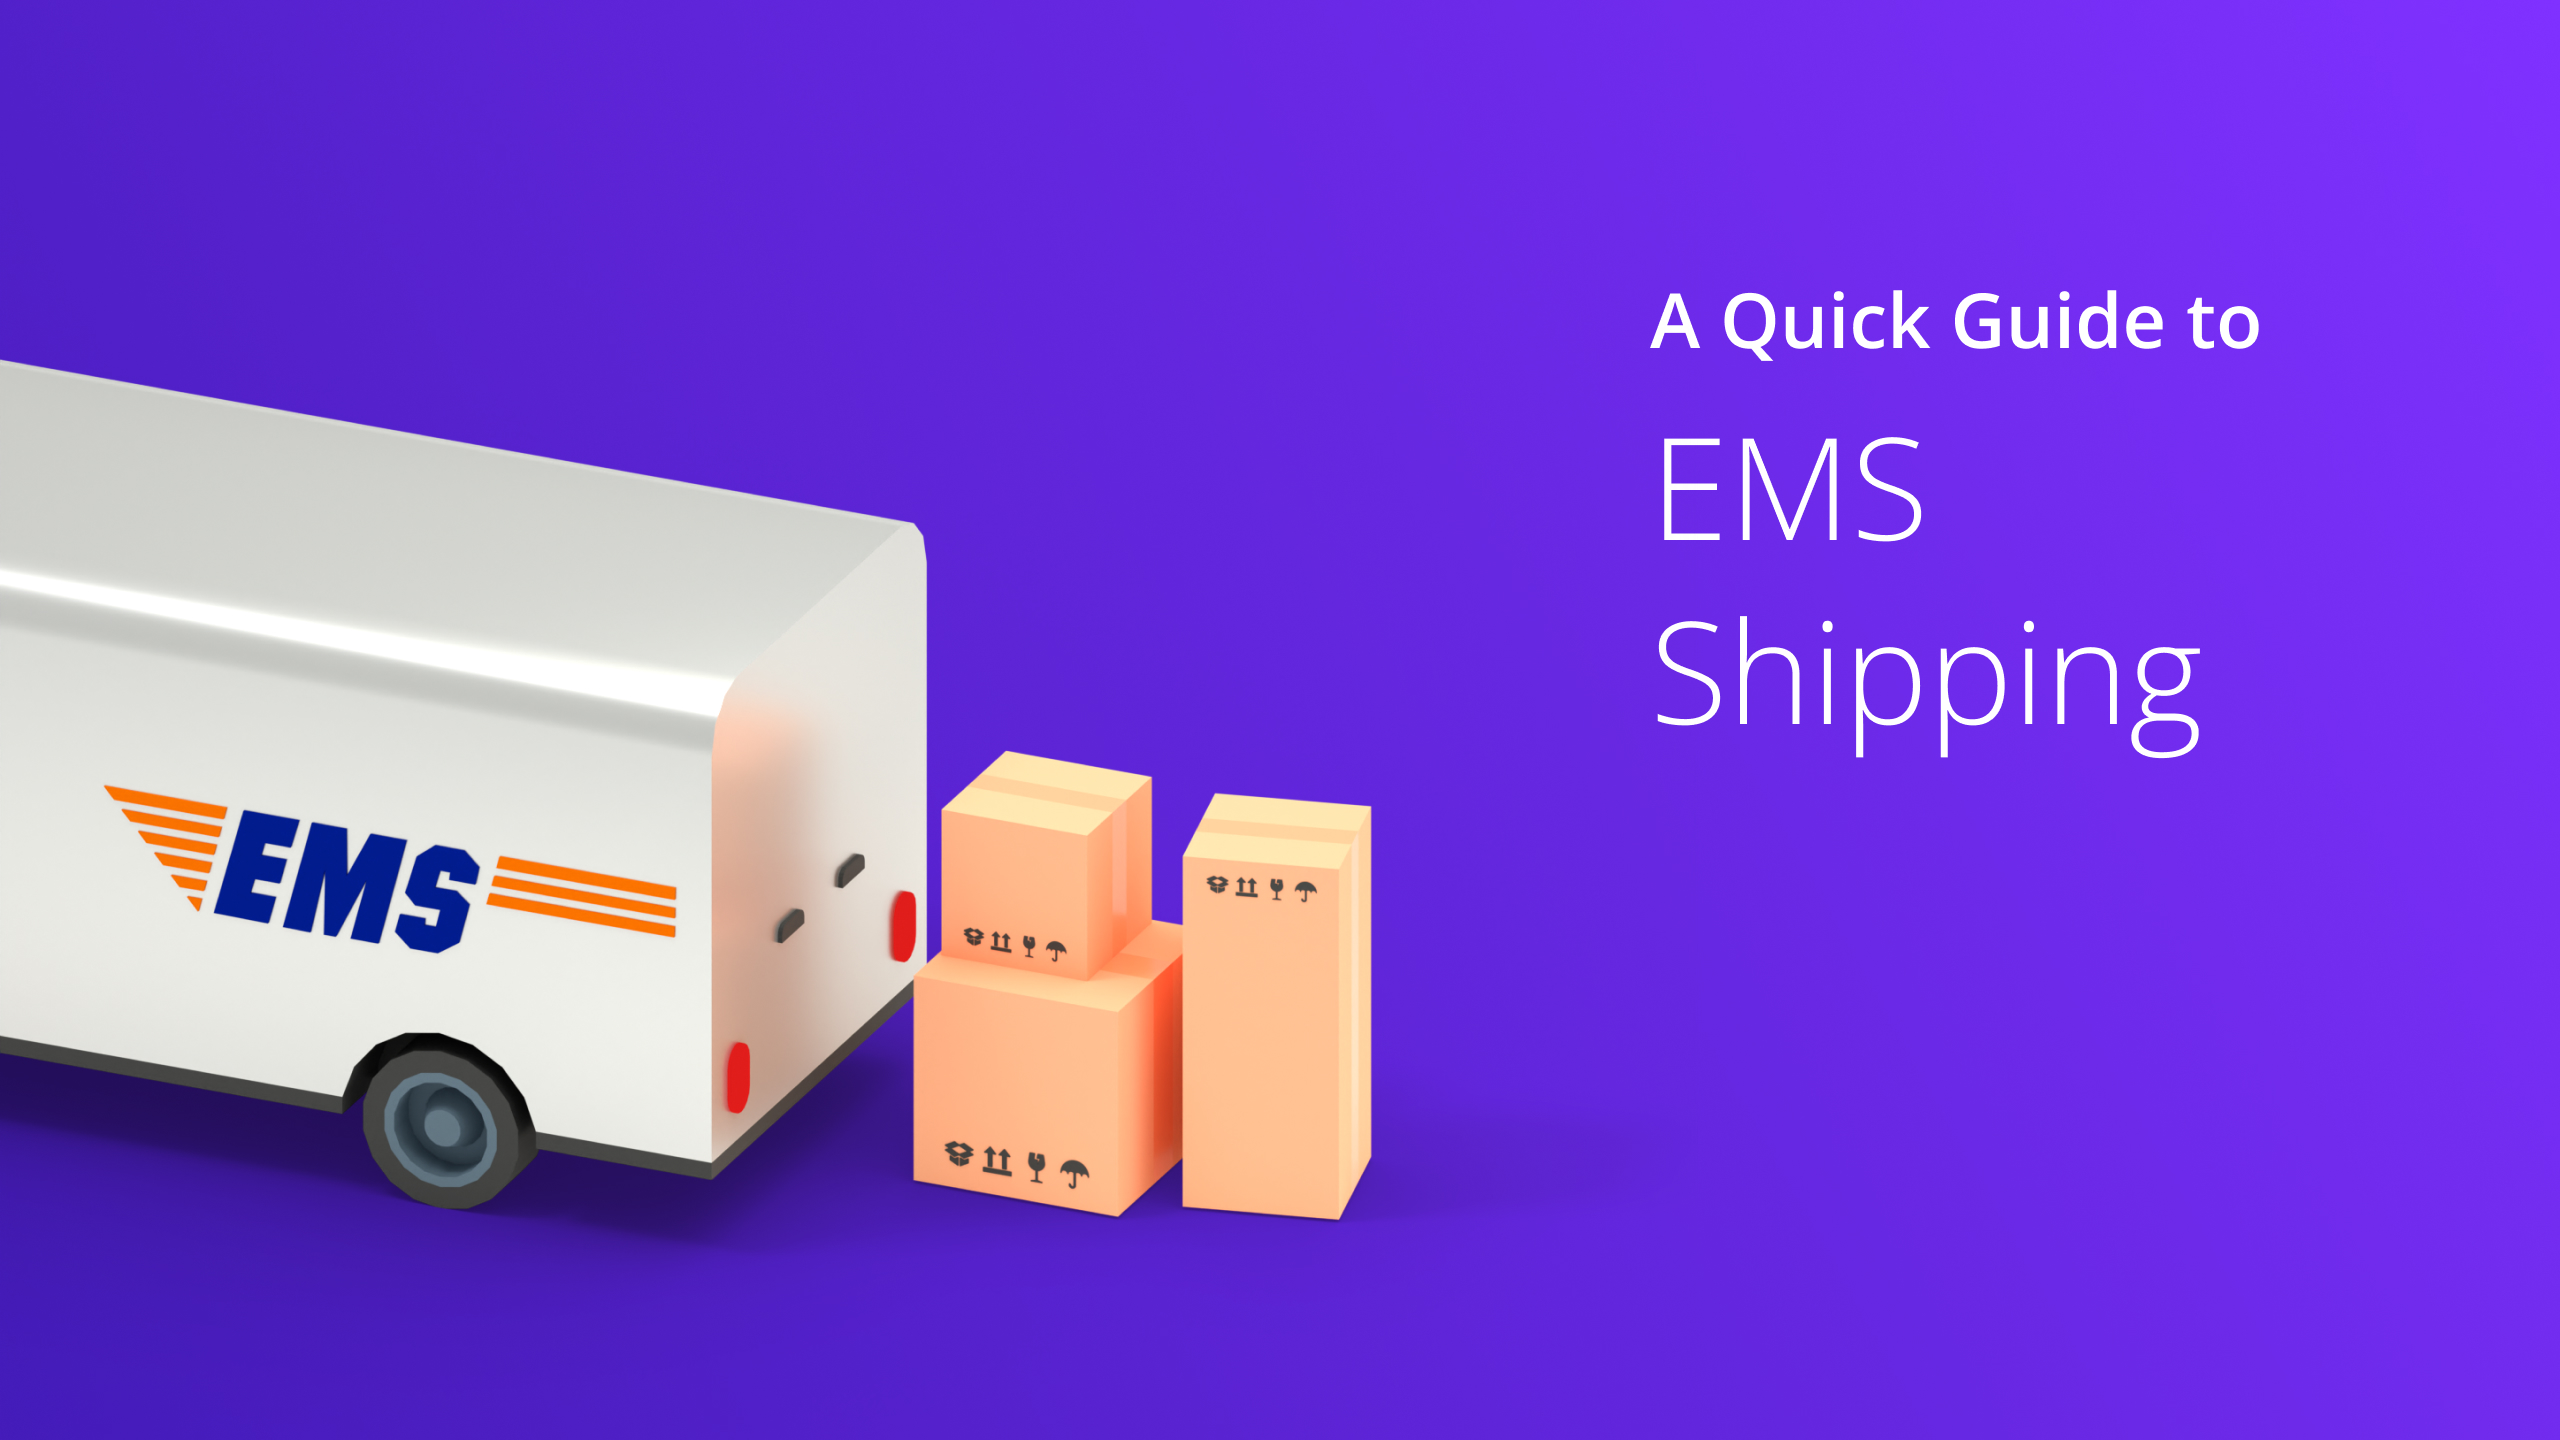 Custom Image - A Quick Guide to EMS Shipping